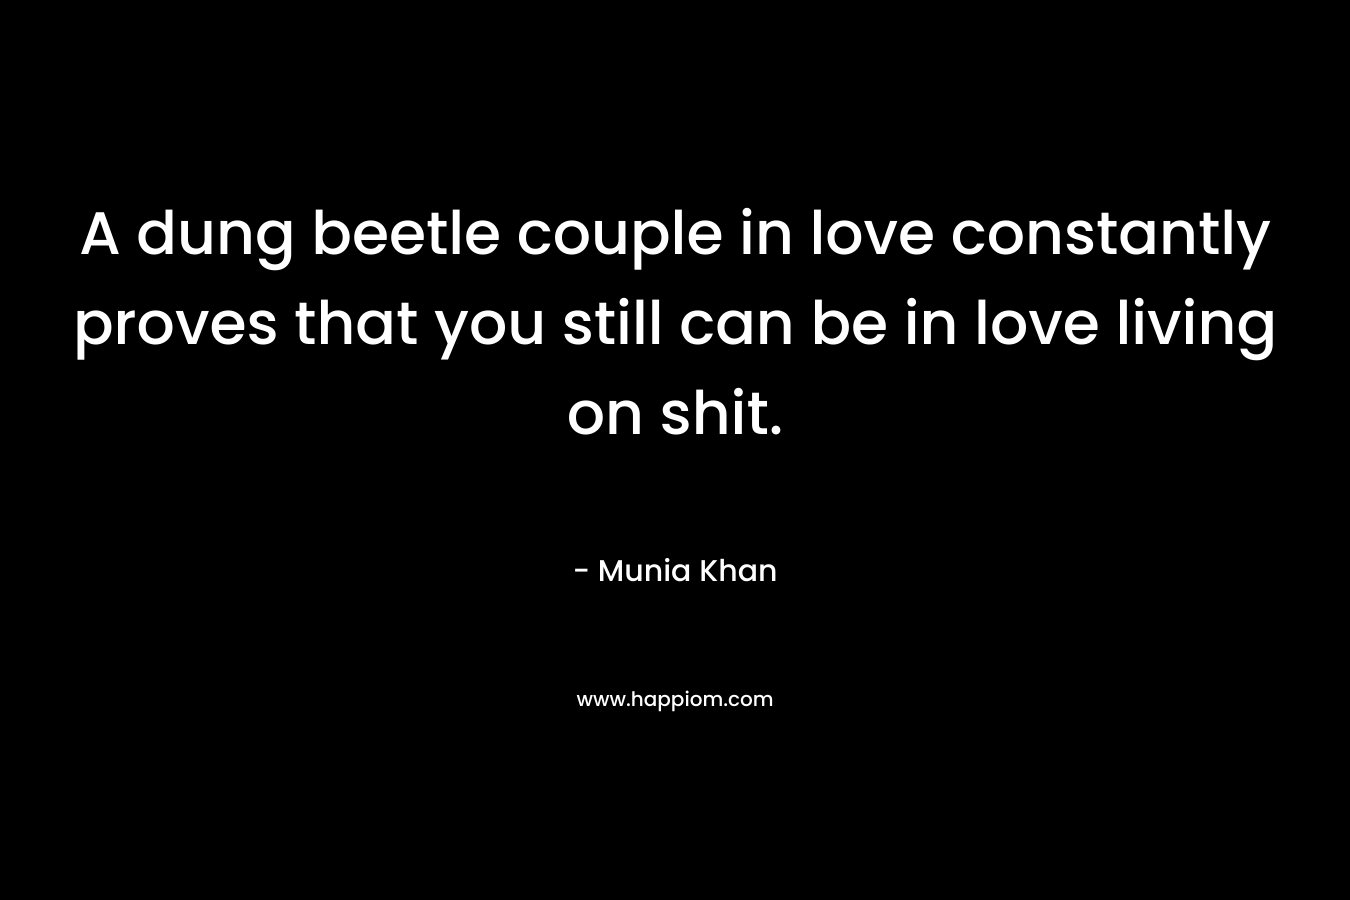 A dung beetle couple in love constantly proves that you still can be in love living on shit.